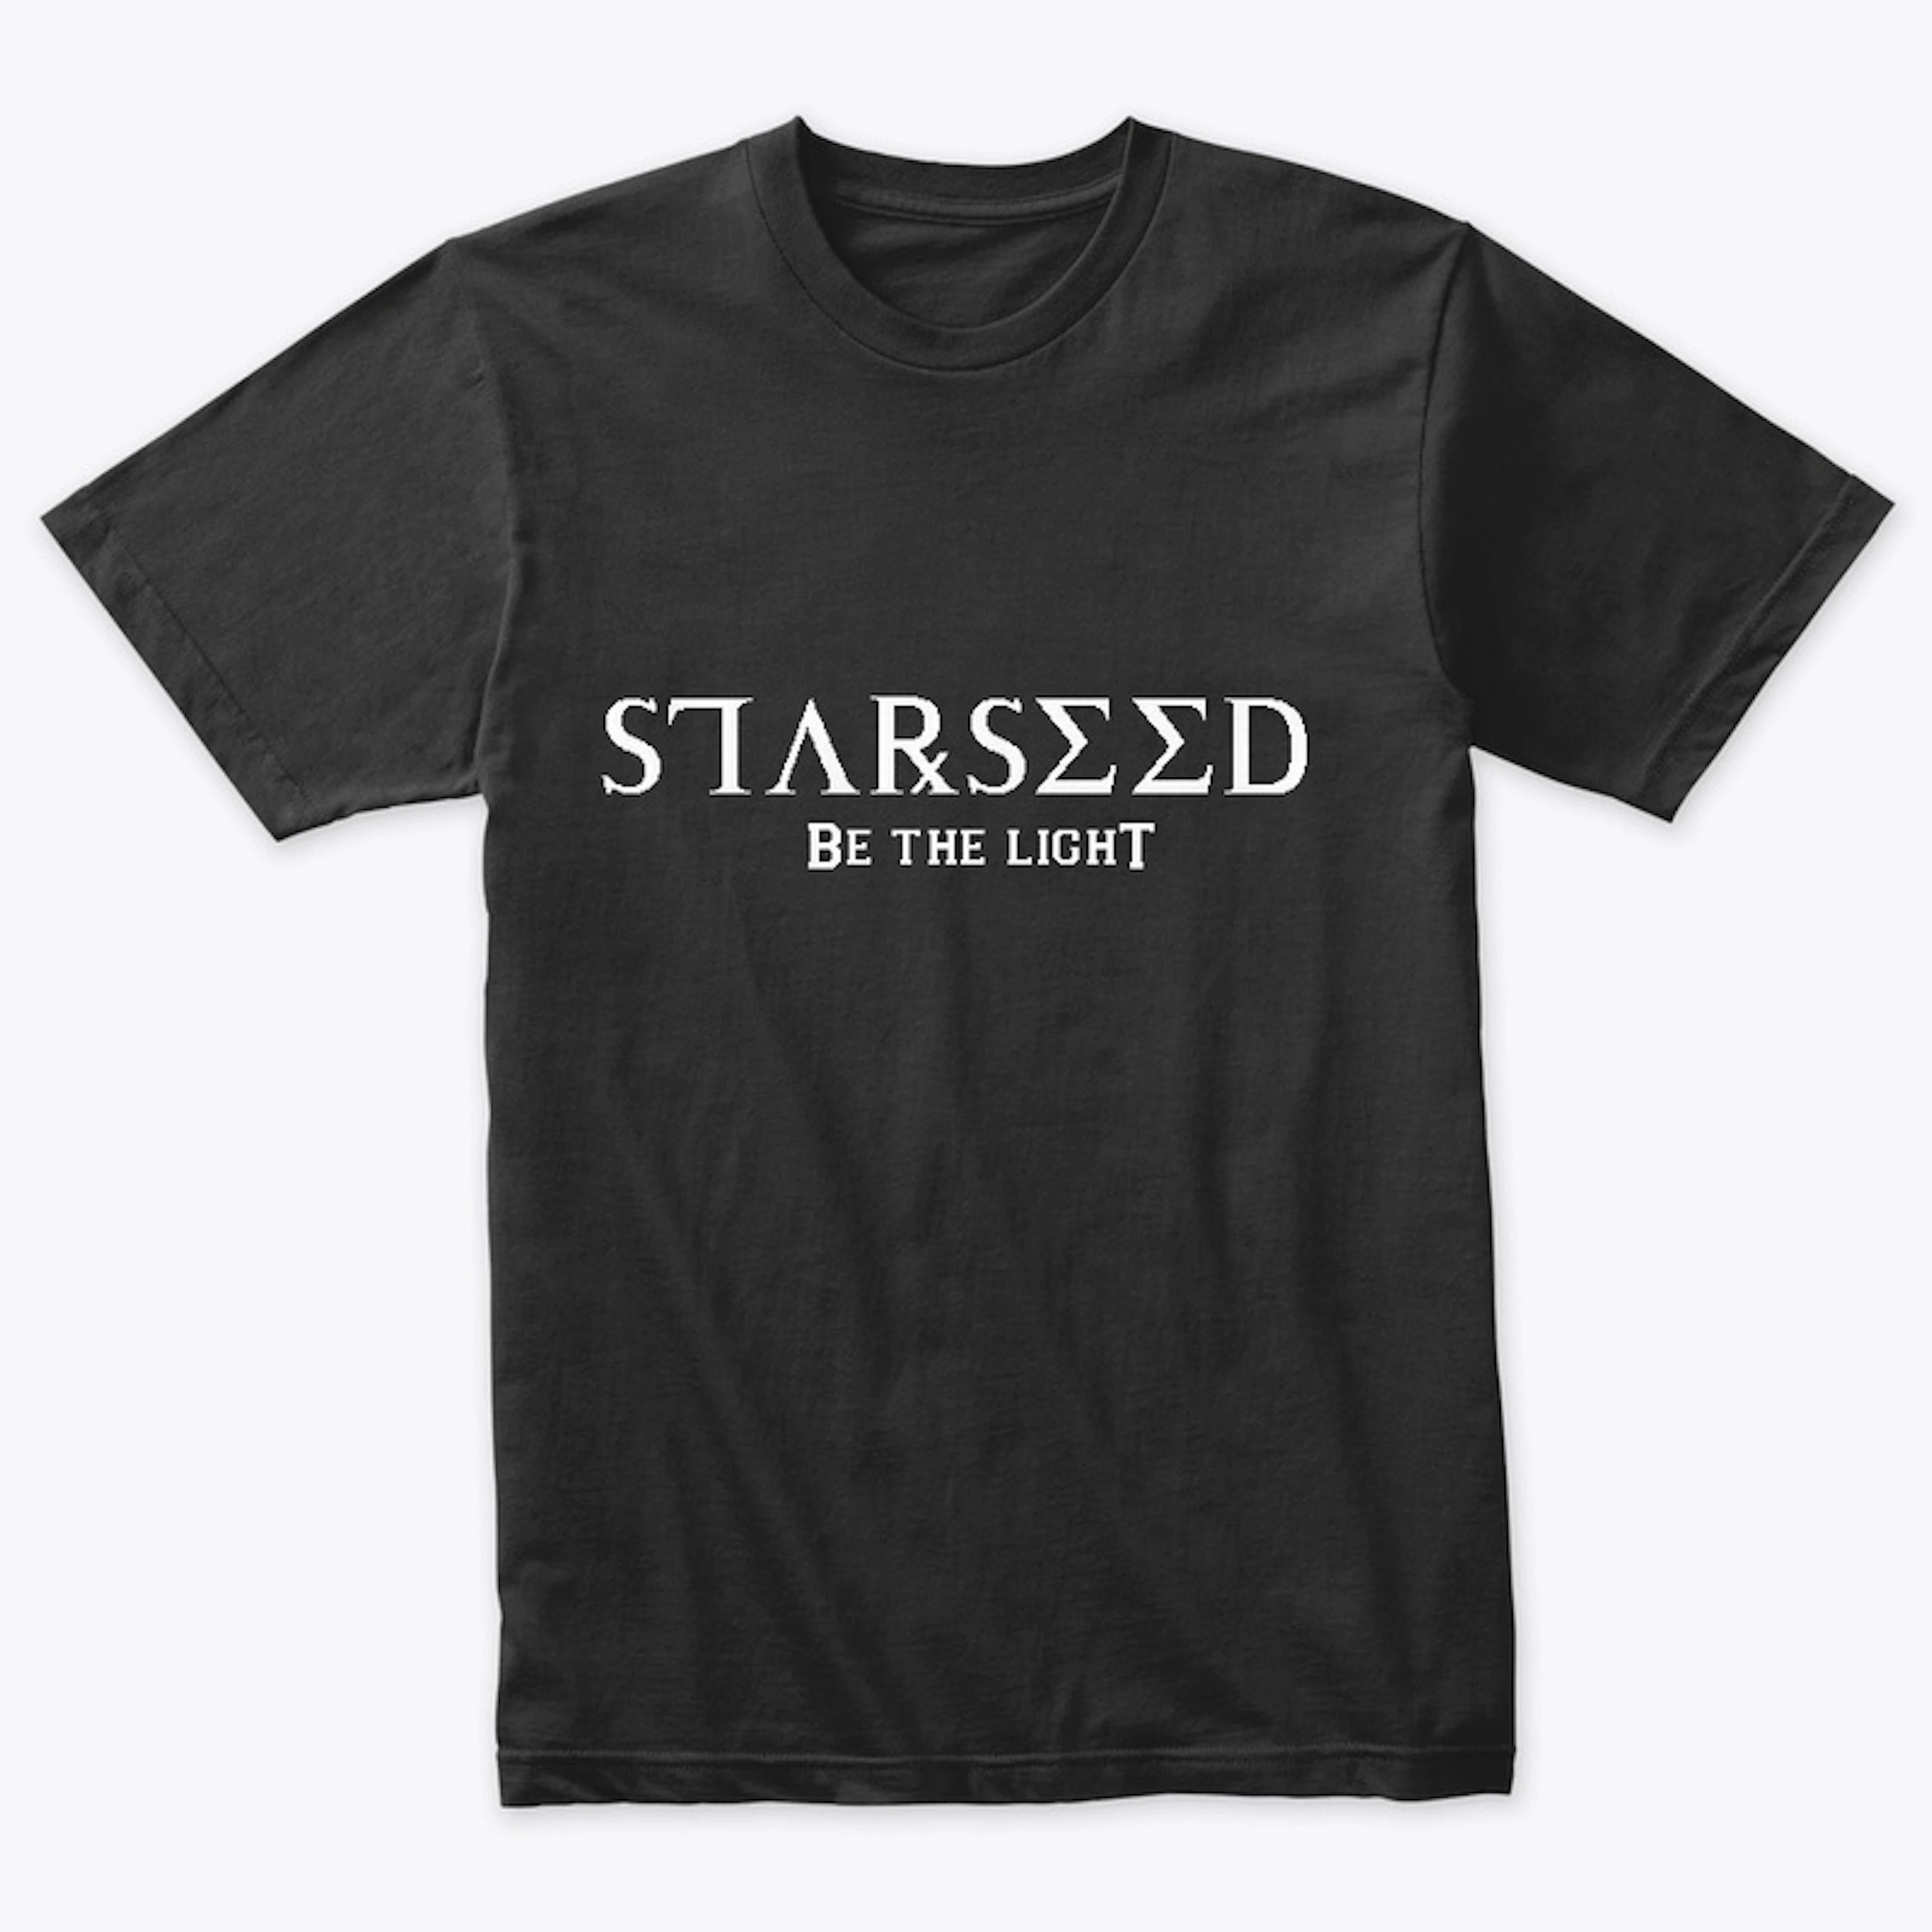 Starseed -Be the light